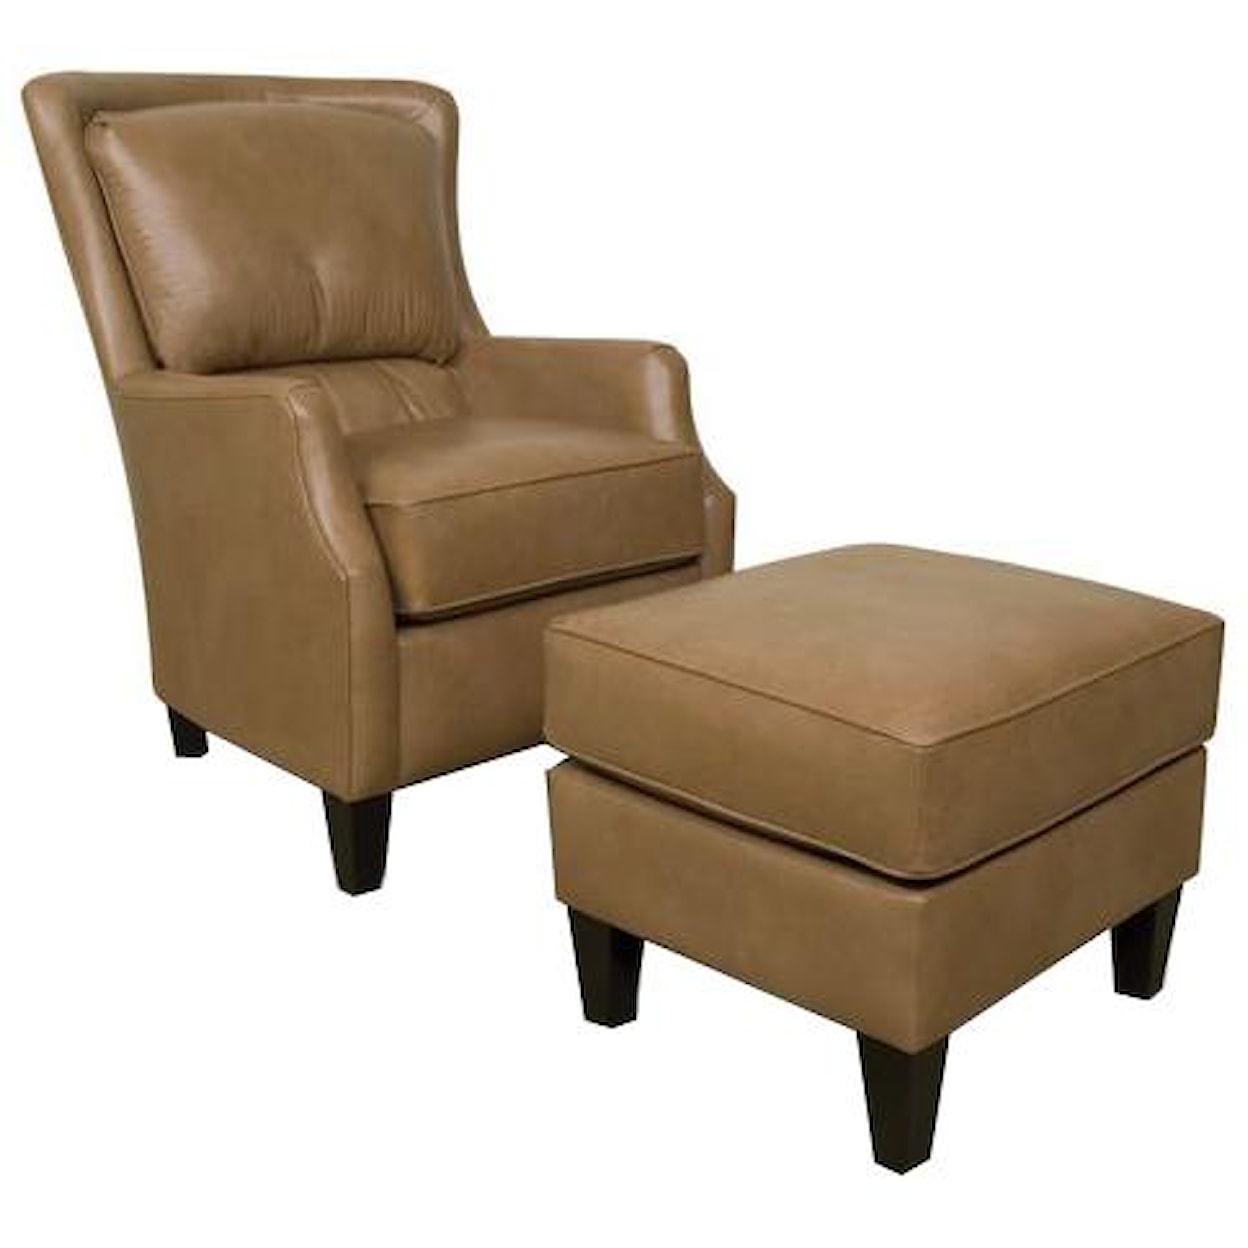 England 2910/AL Series Upholstered Club Chair and Ottoman